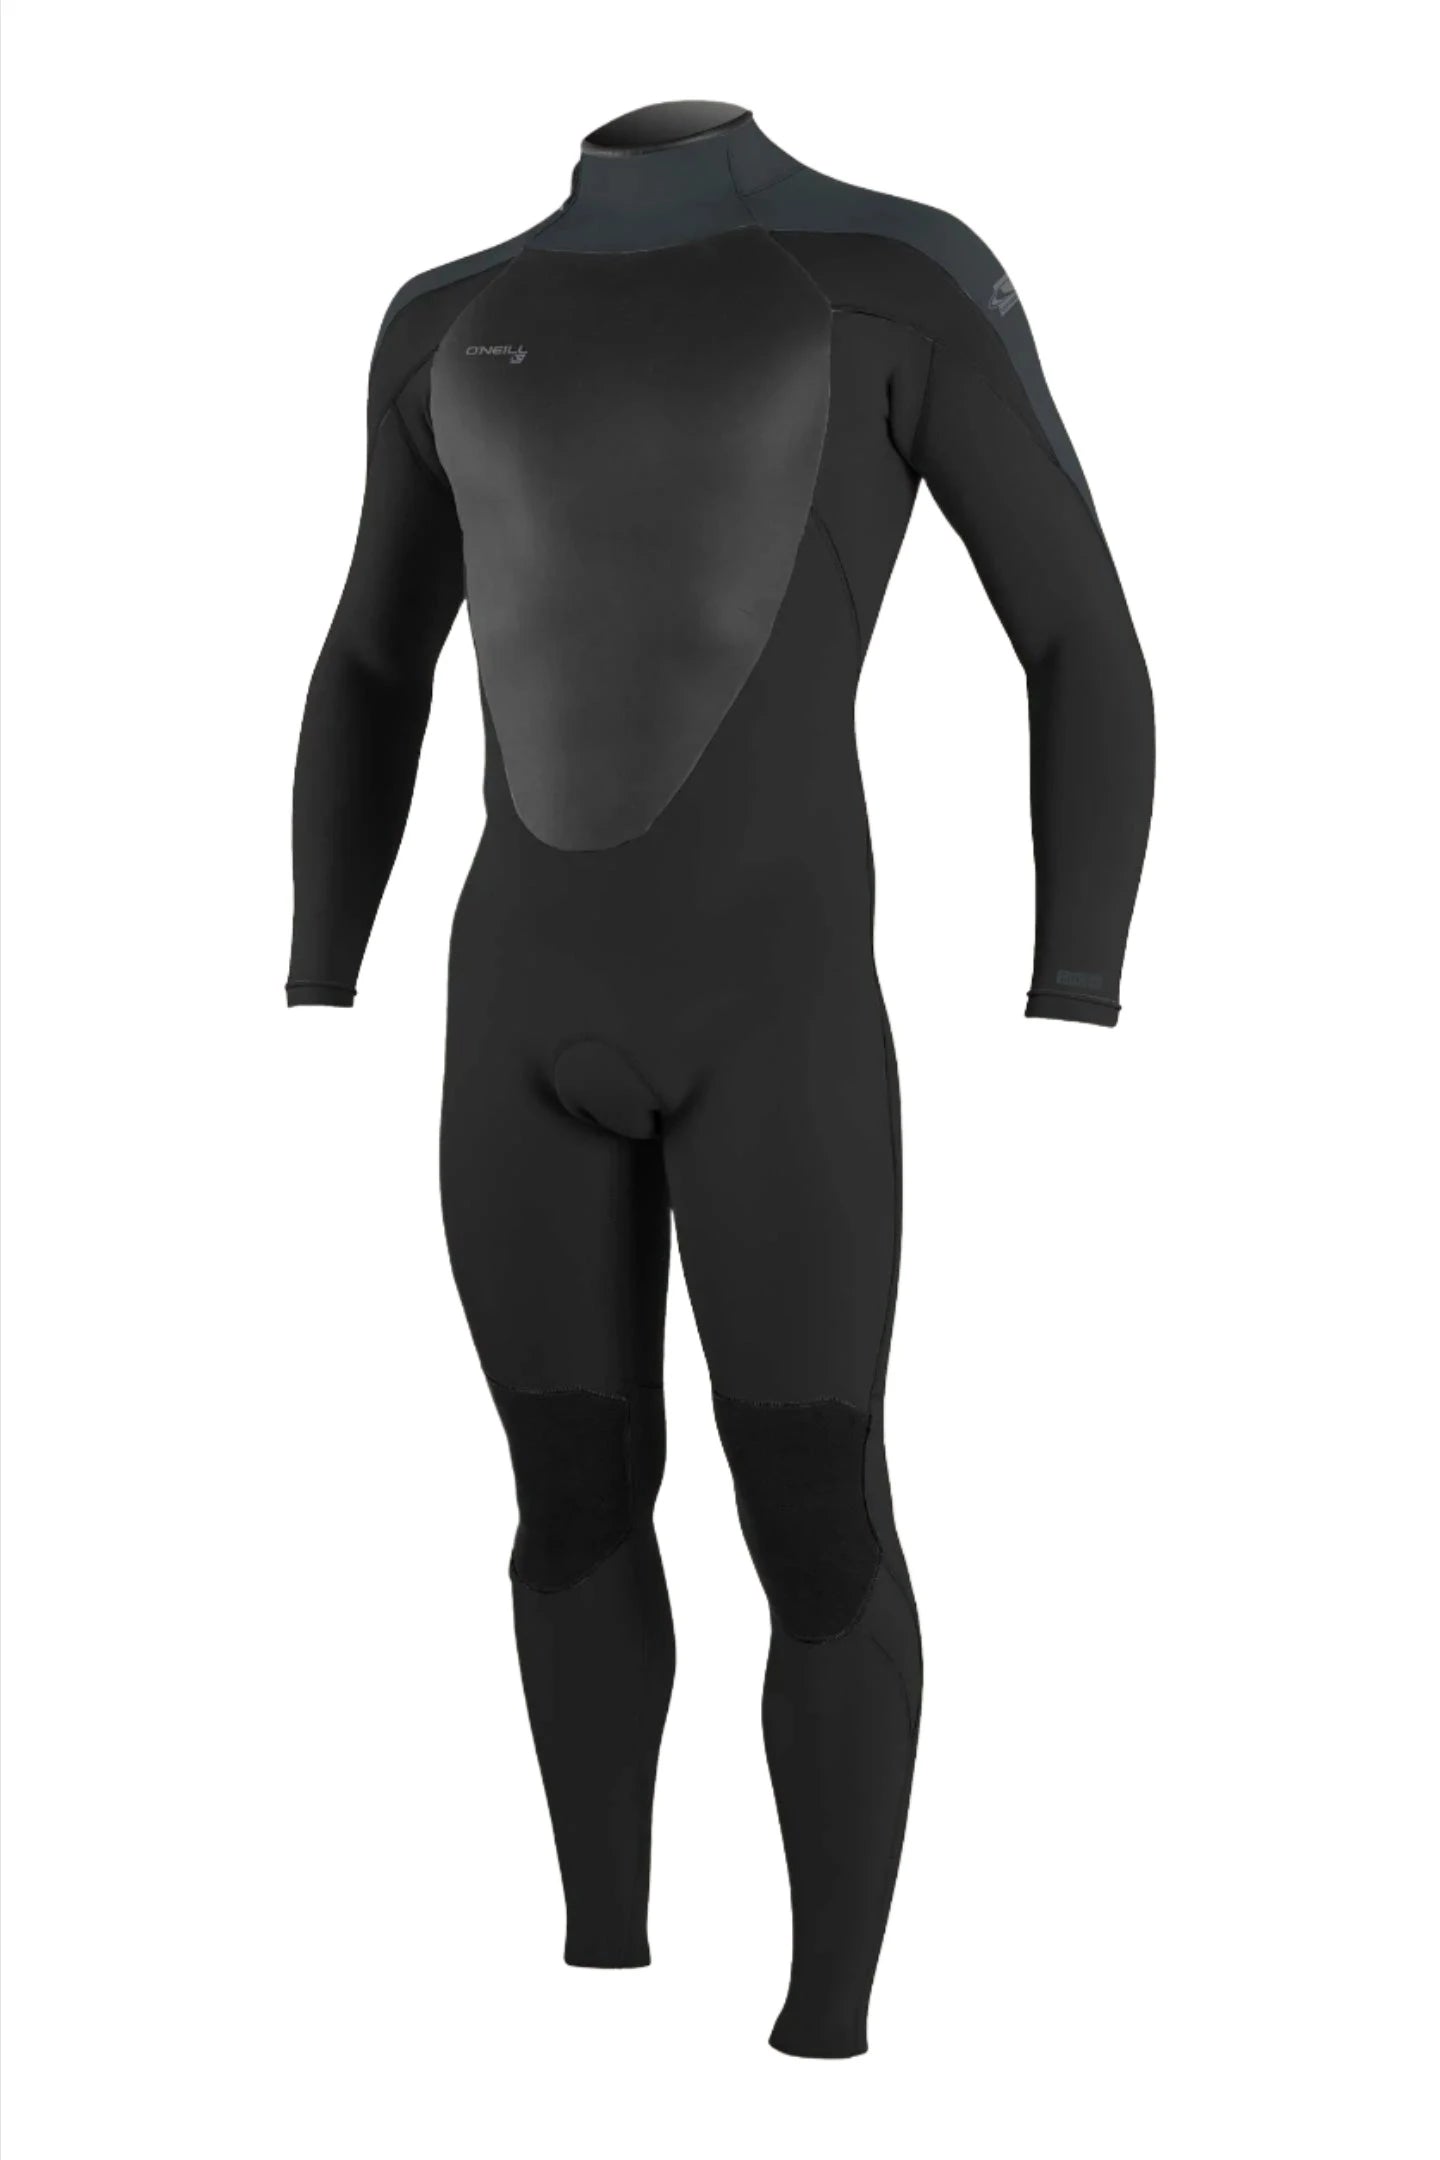 O'NEILL MENS 4/3MM EPIC BACK ZIP WETSUIT